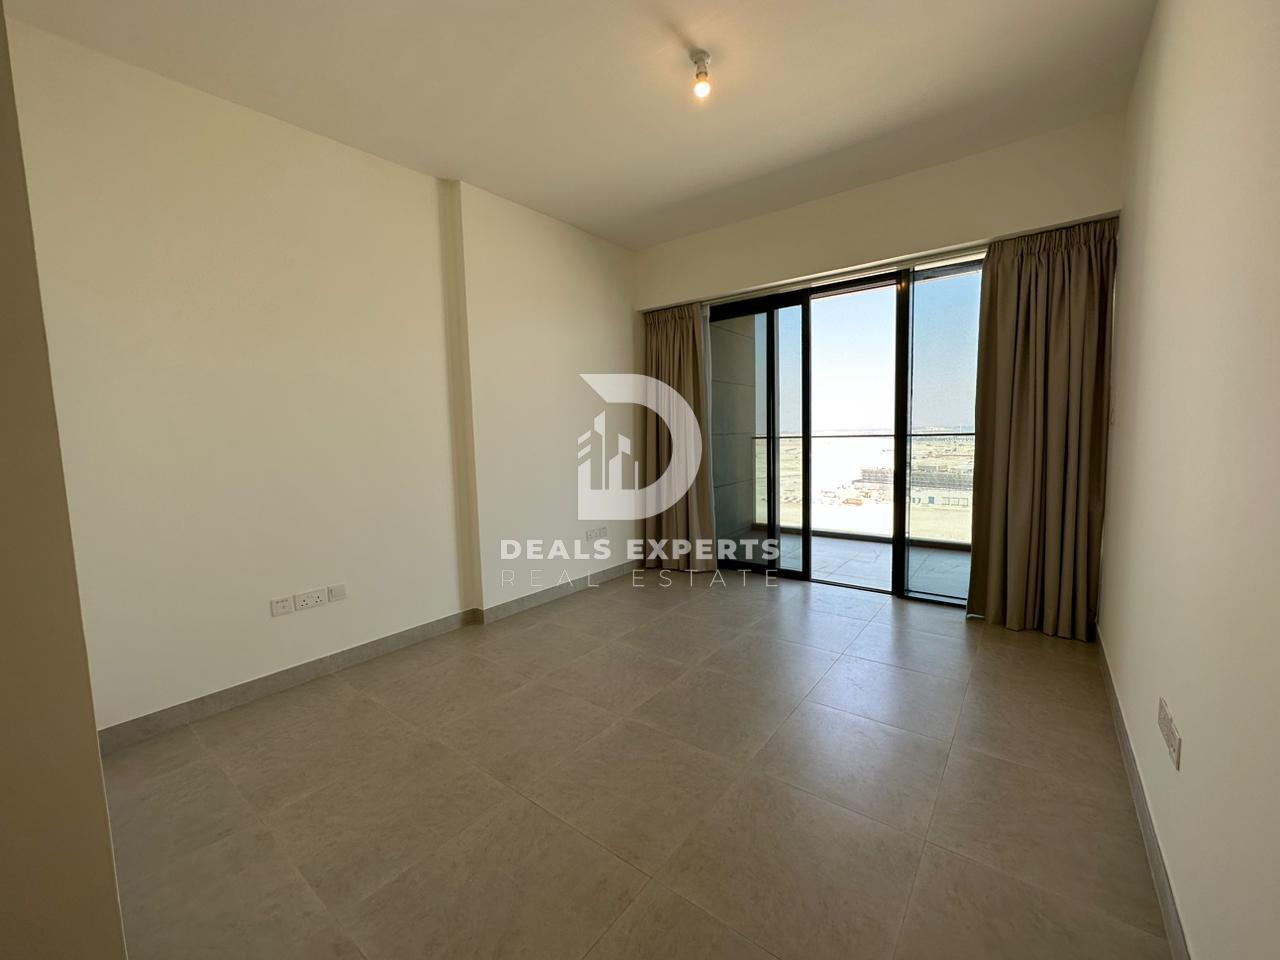 2 bed, 3 bath Apartment for rent in Soho Square, Saadiyat Island, Abu Dhabi for price AED 85000 yearly 